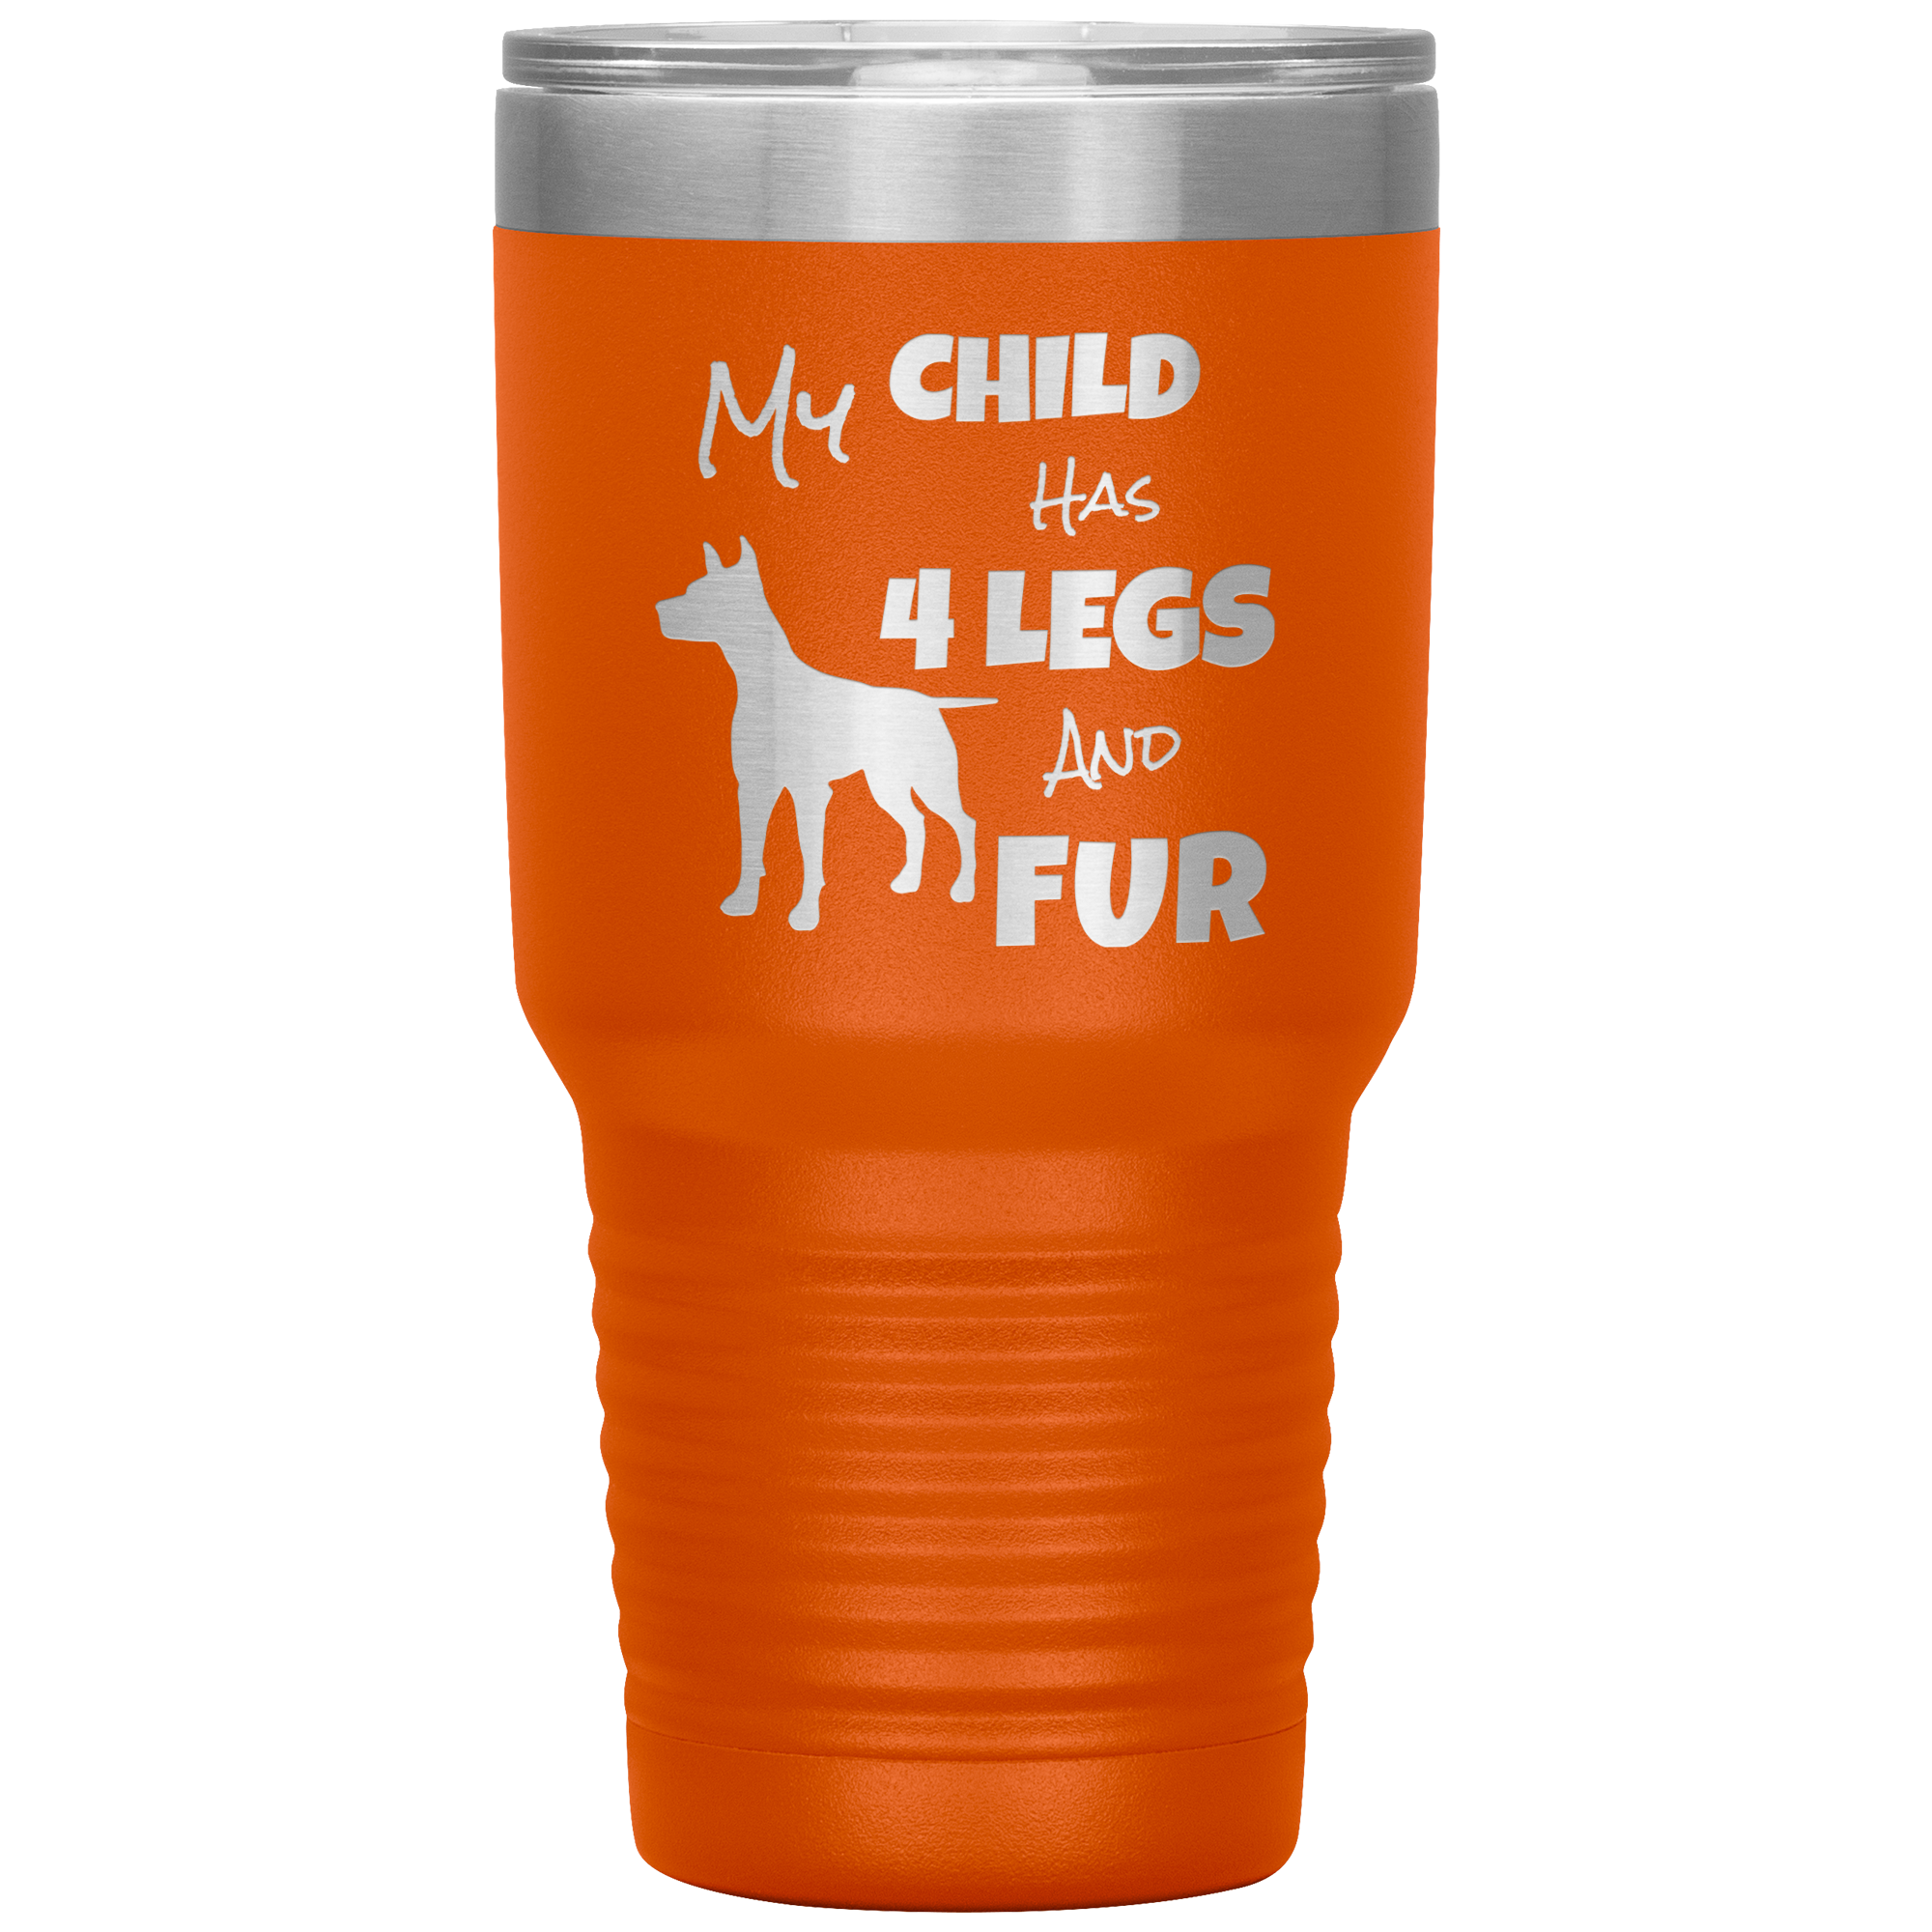 My Child Has 4 Legs And FUR - 30oz Vacuum Tumbler - Great for Travel